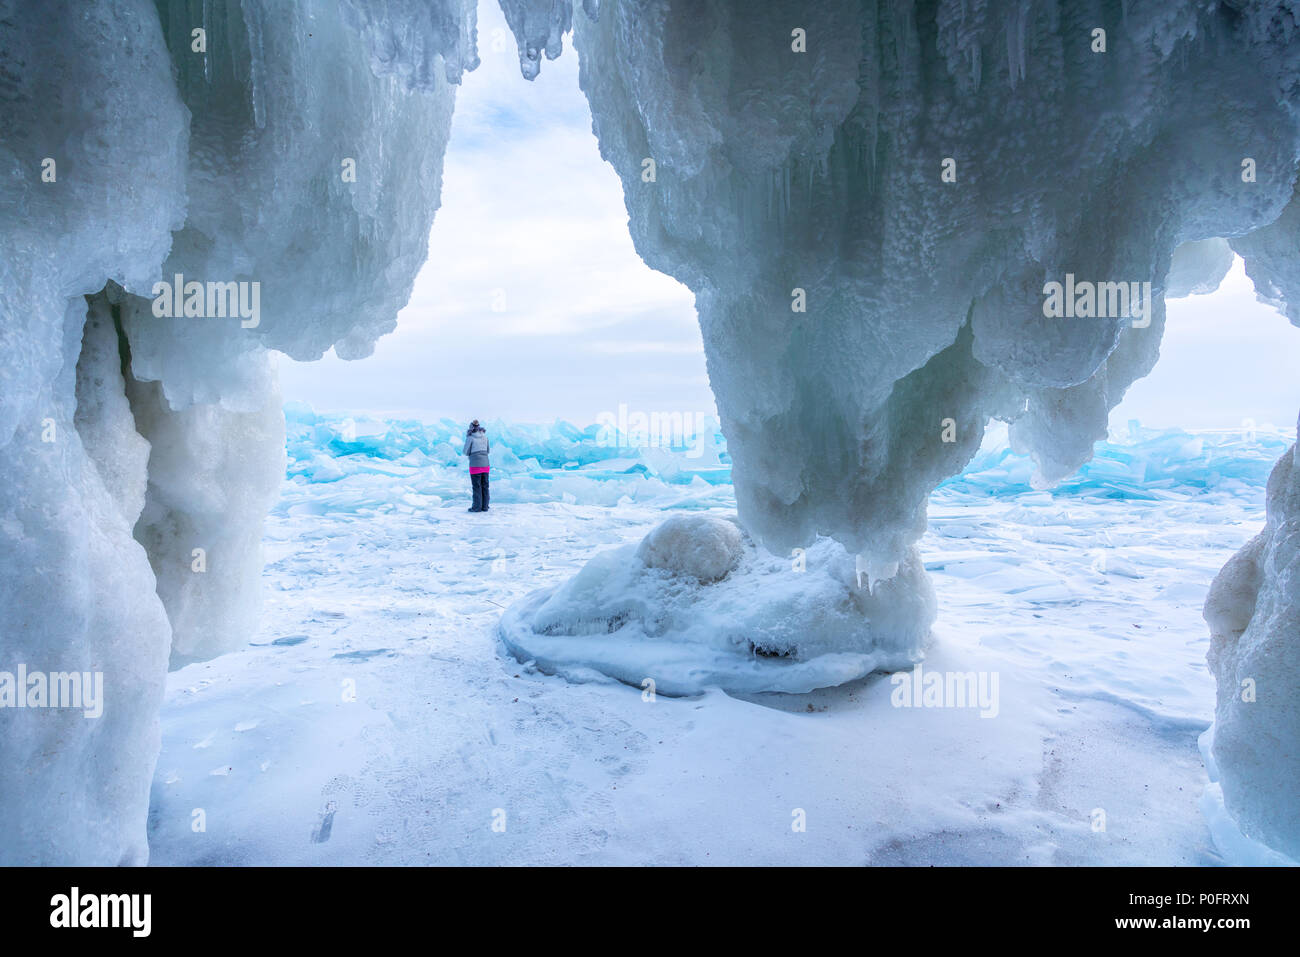 Frozen ice cave at frozen lake Baikal in Siberia, Russia Stock Photo